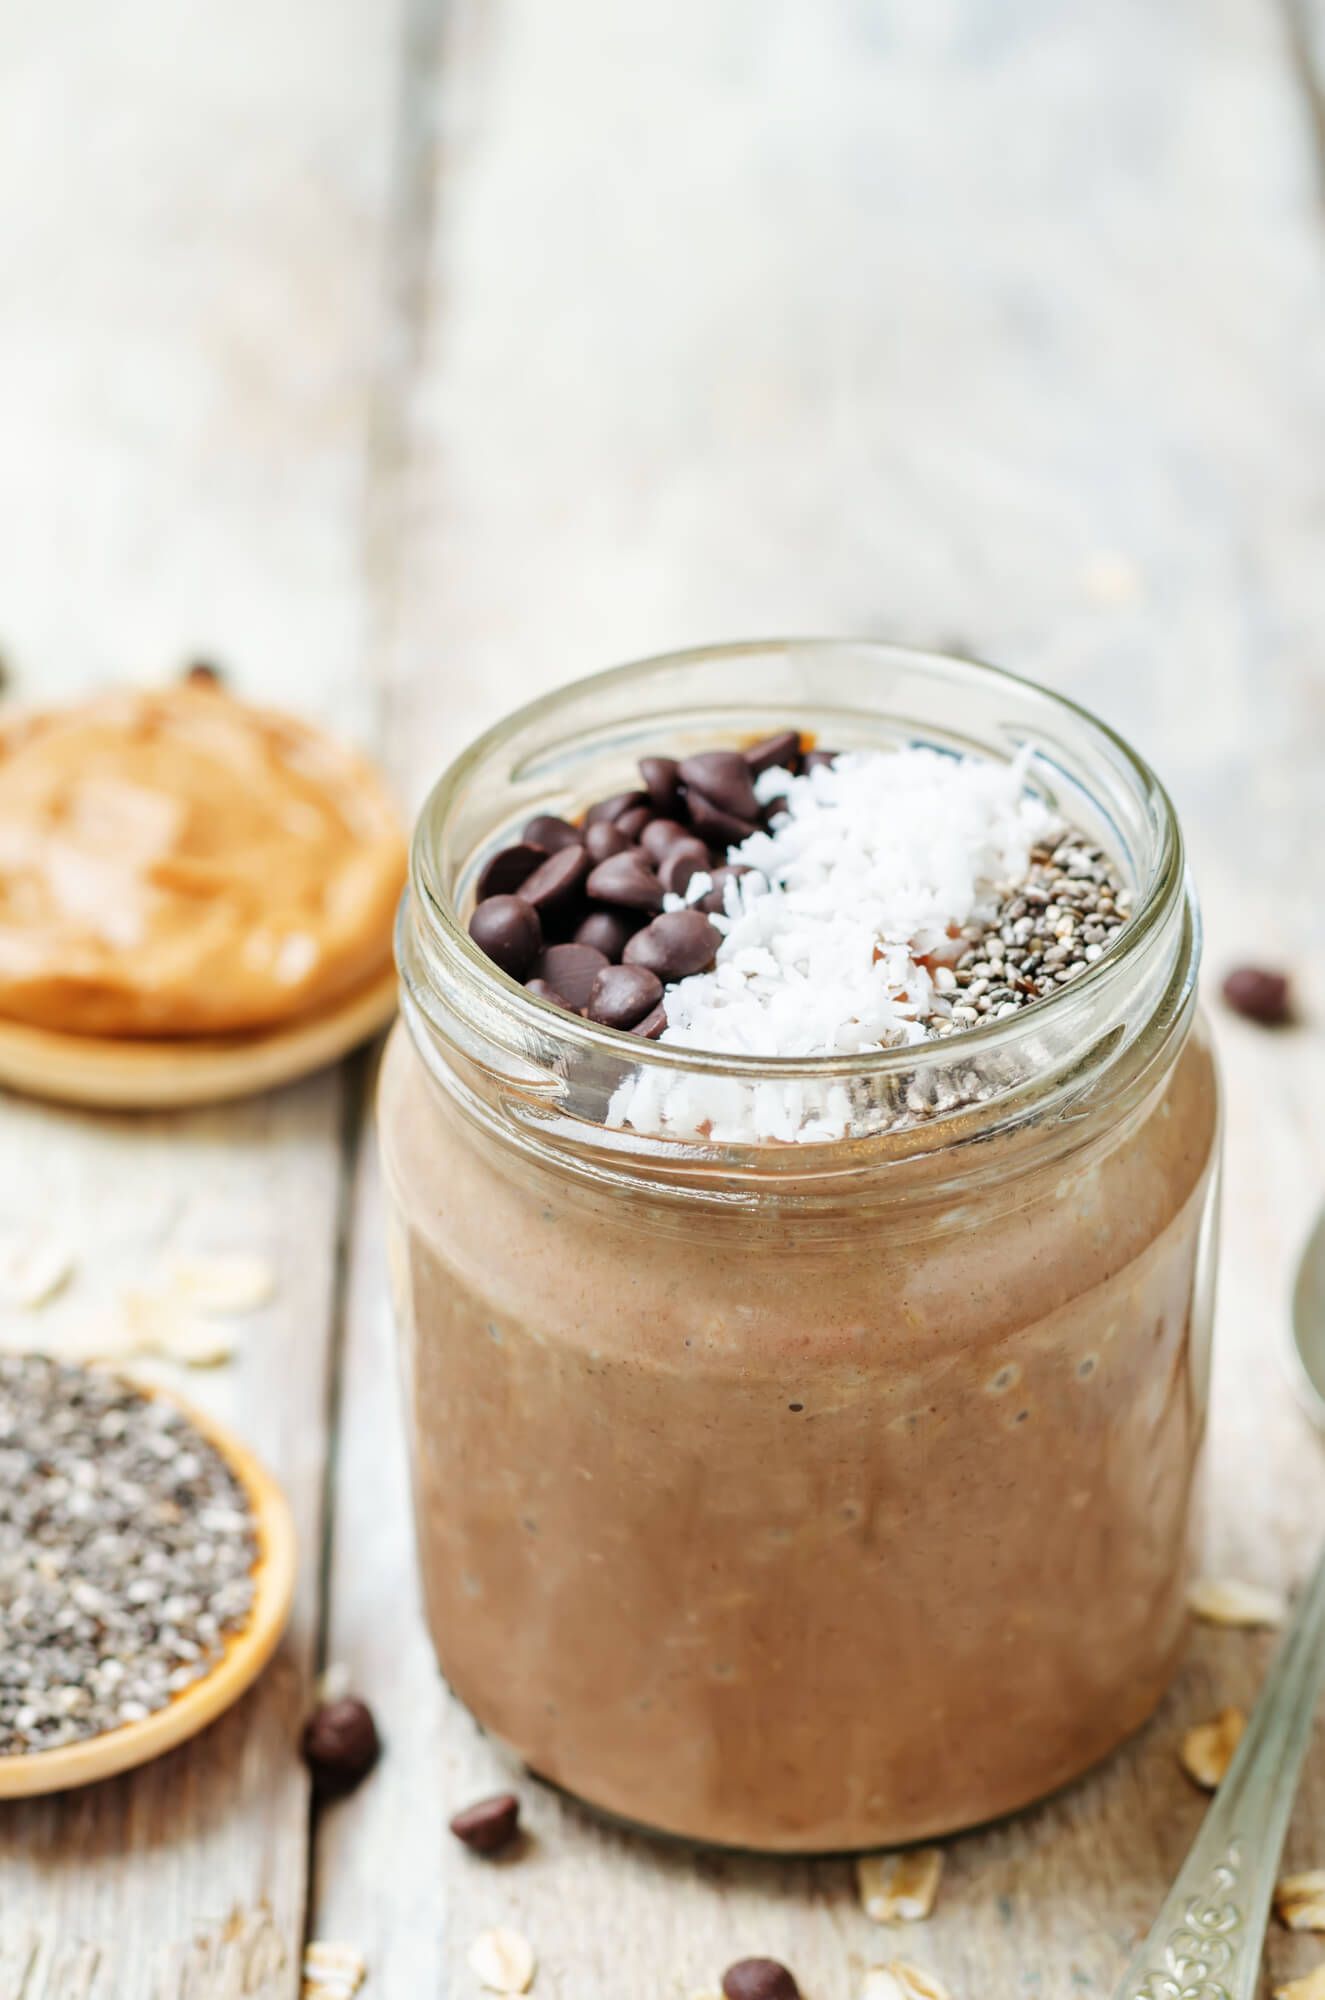 Chocolate chia seed pudding in a glass jar with peanut butter and chia seeds in the background.